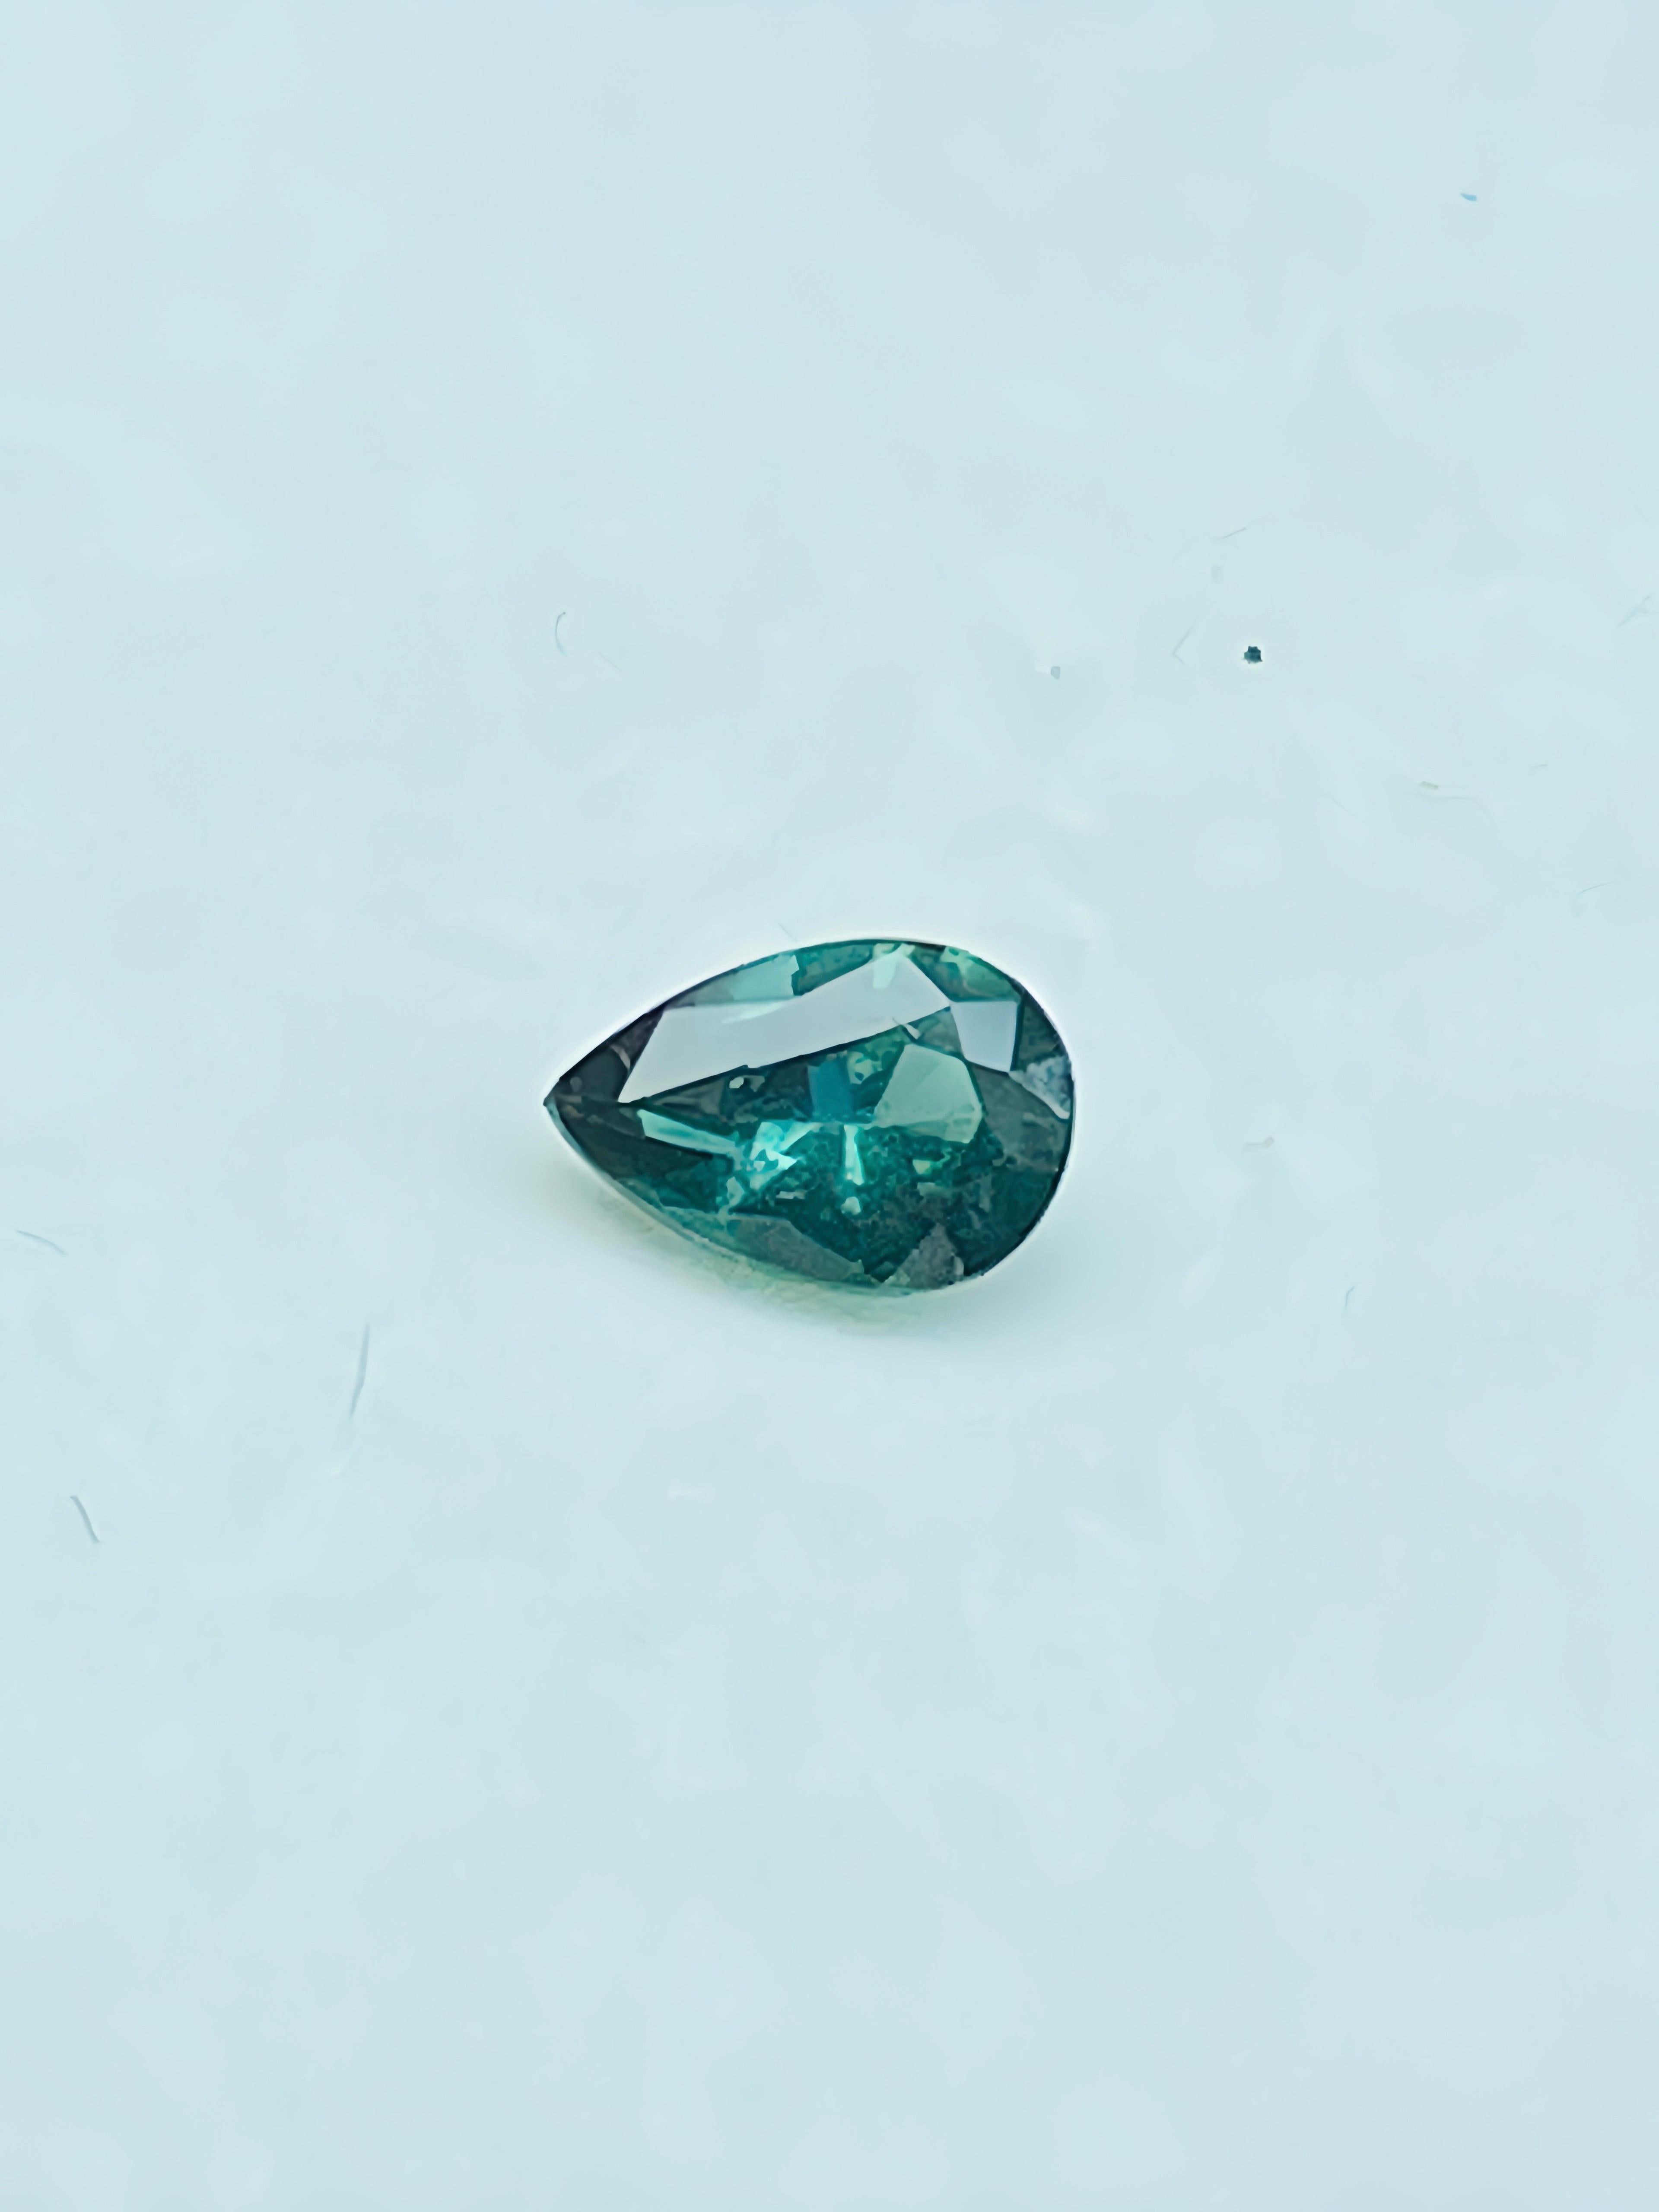 Alexandrite 0.22ct deep green to pinkish red color change rare gemstone 

Weight: 0.22ct
Size: 4.5*3.5*2.2mm
Origins: Srilanka 
Color :Deep Green to pinkish red
Clarity : Eye clean 
WB selected quality gemstone 
Rare top color change quality 

